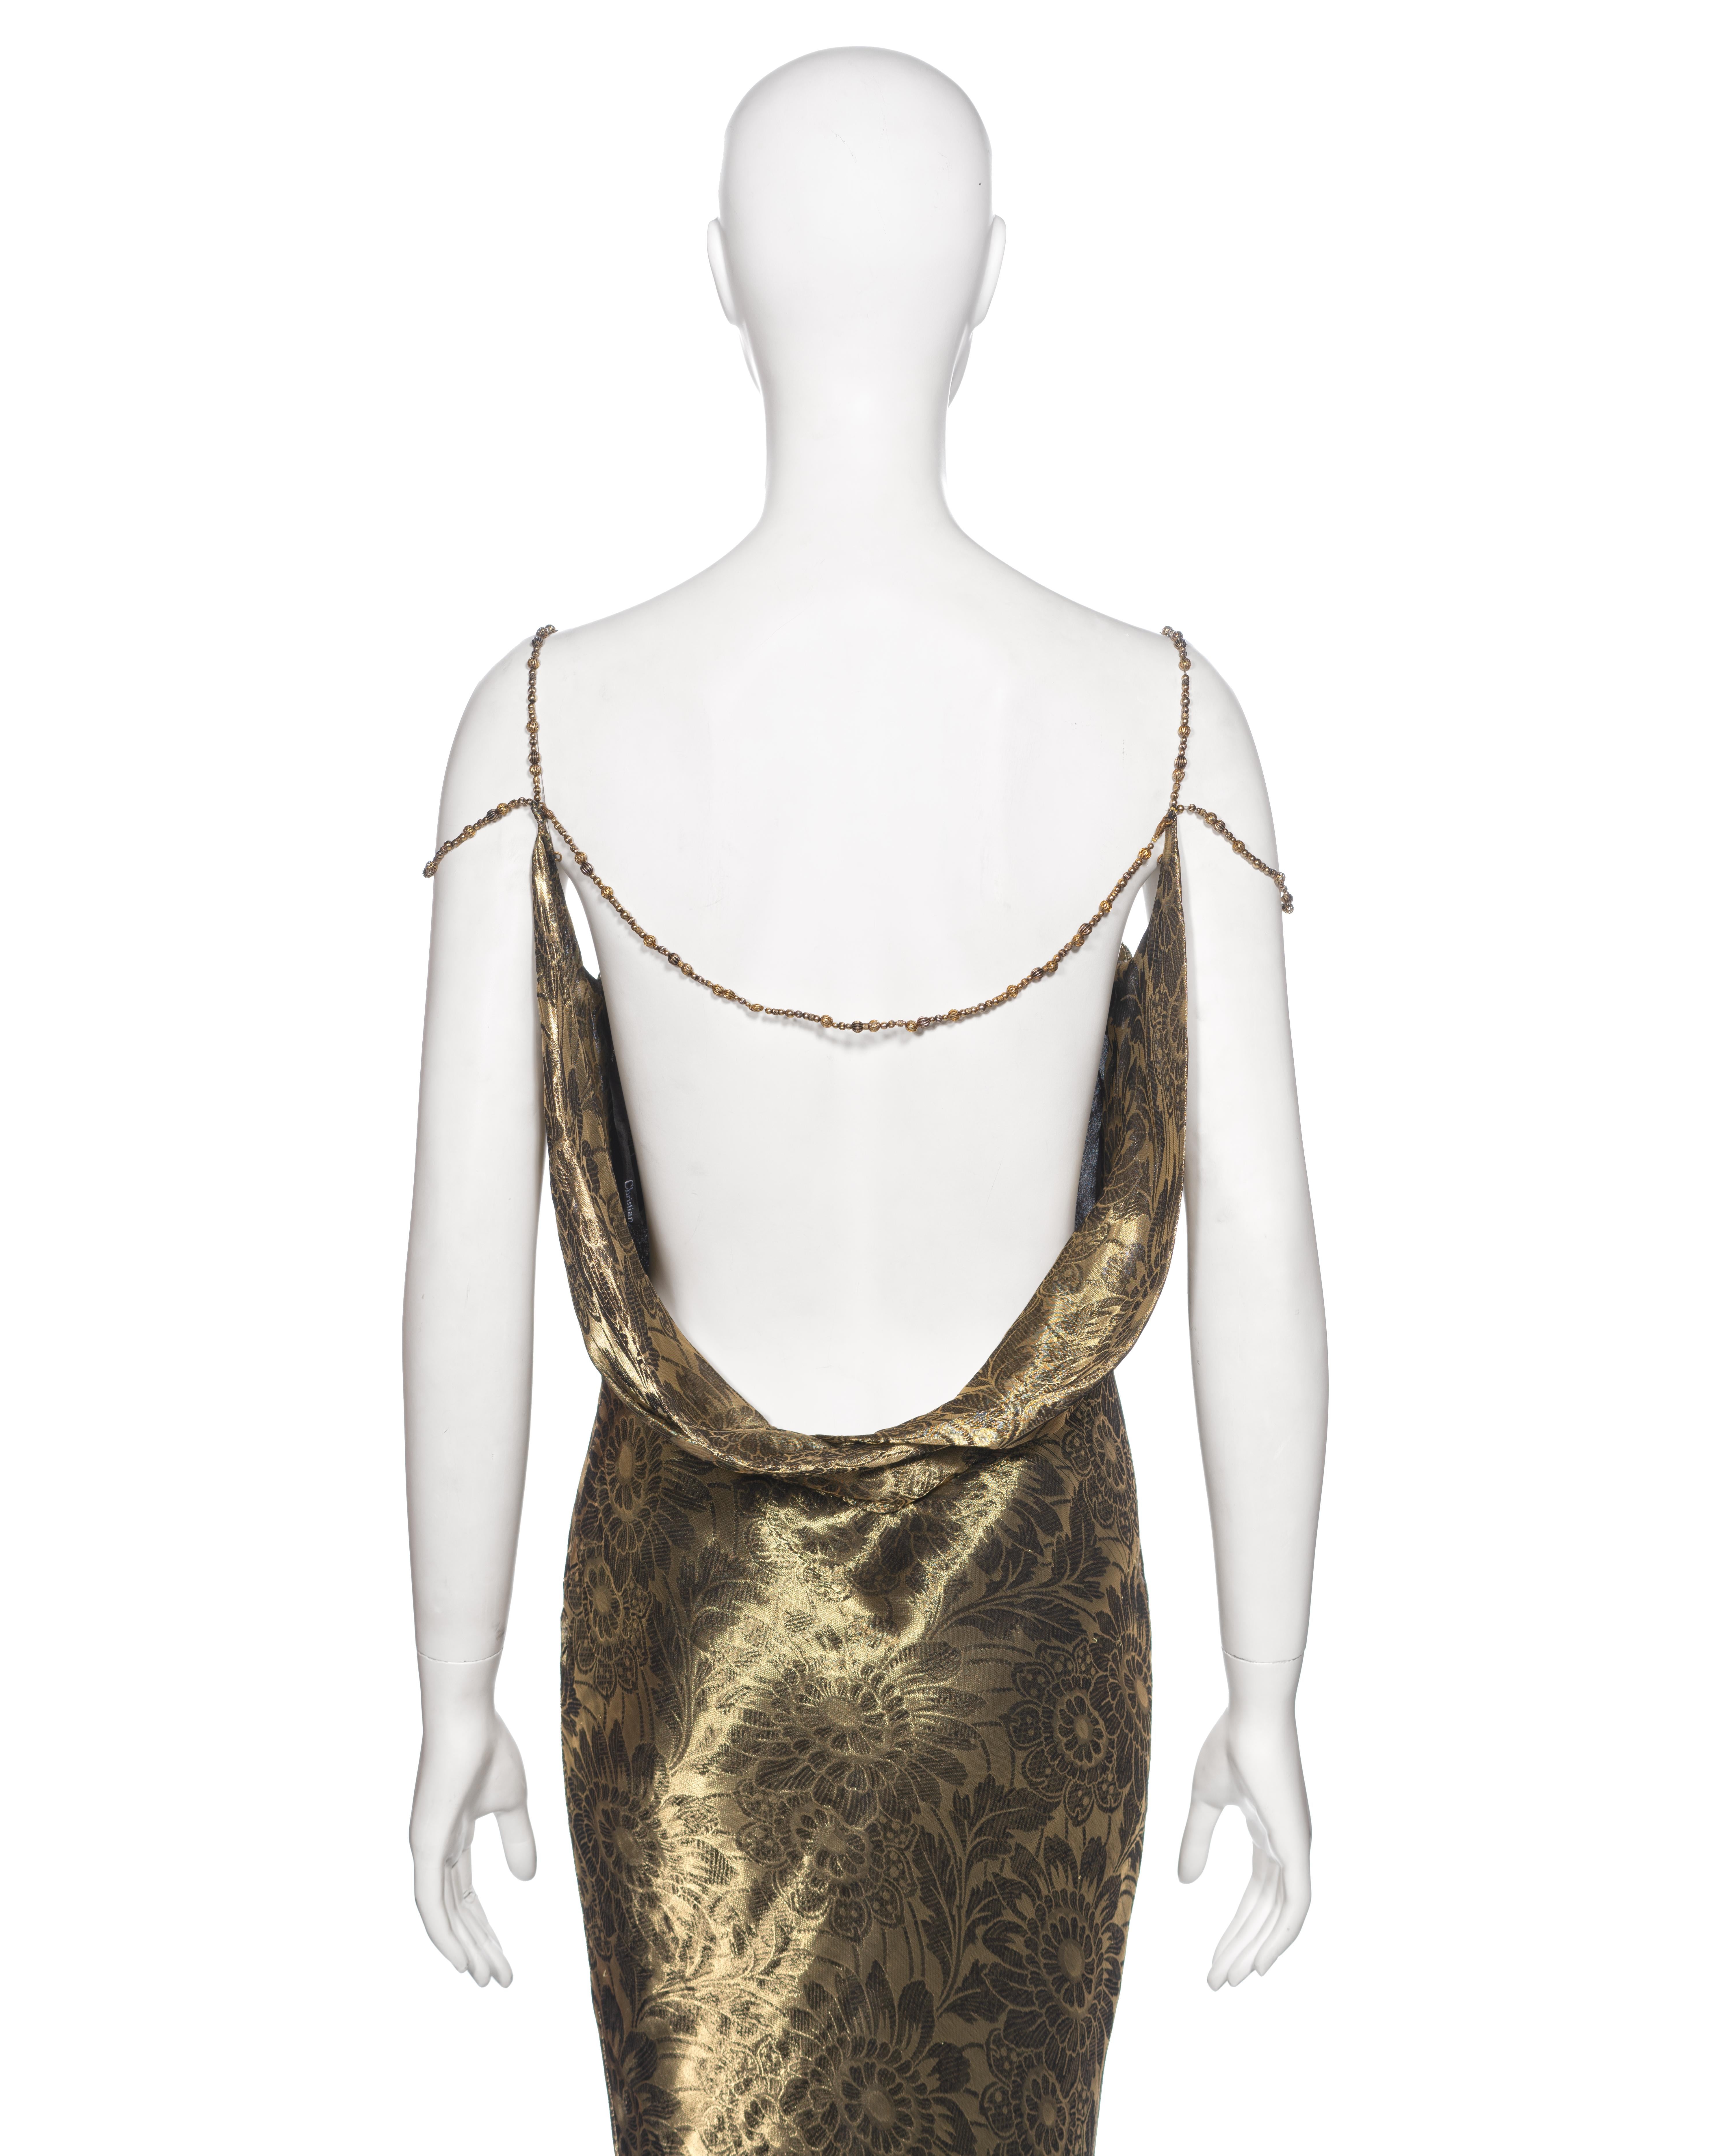 Christian Dior by John Galliano Metallic Antique Gold Evening Dress, FW 1998 For Sale 1